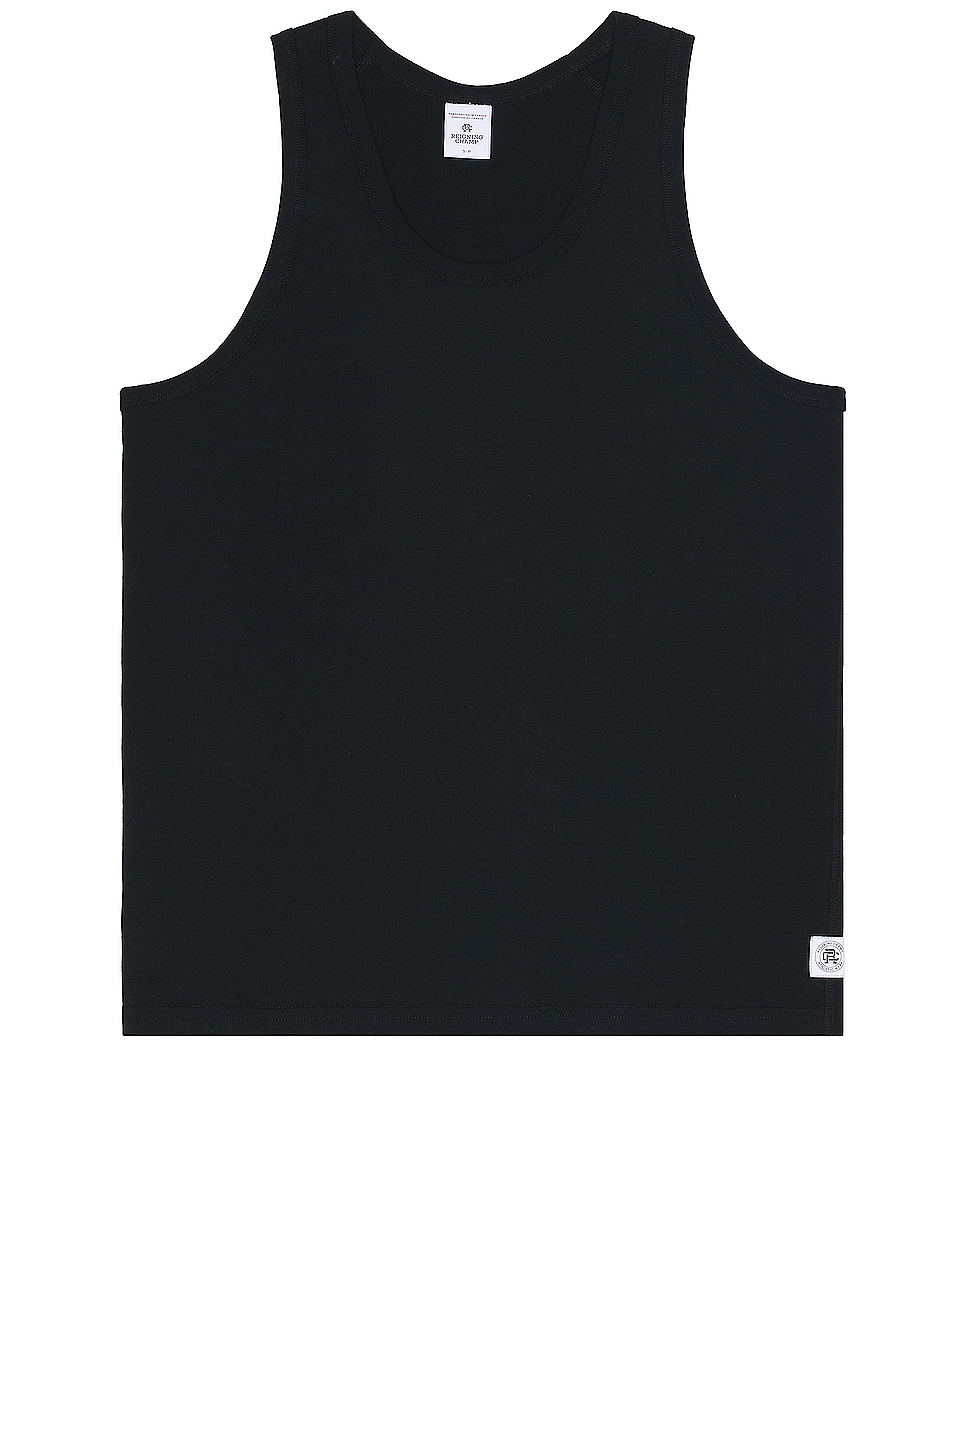 Image 1 of Reigning Champ Lightweight Jersey Tank Top in Black